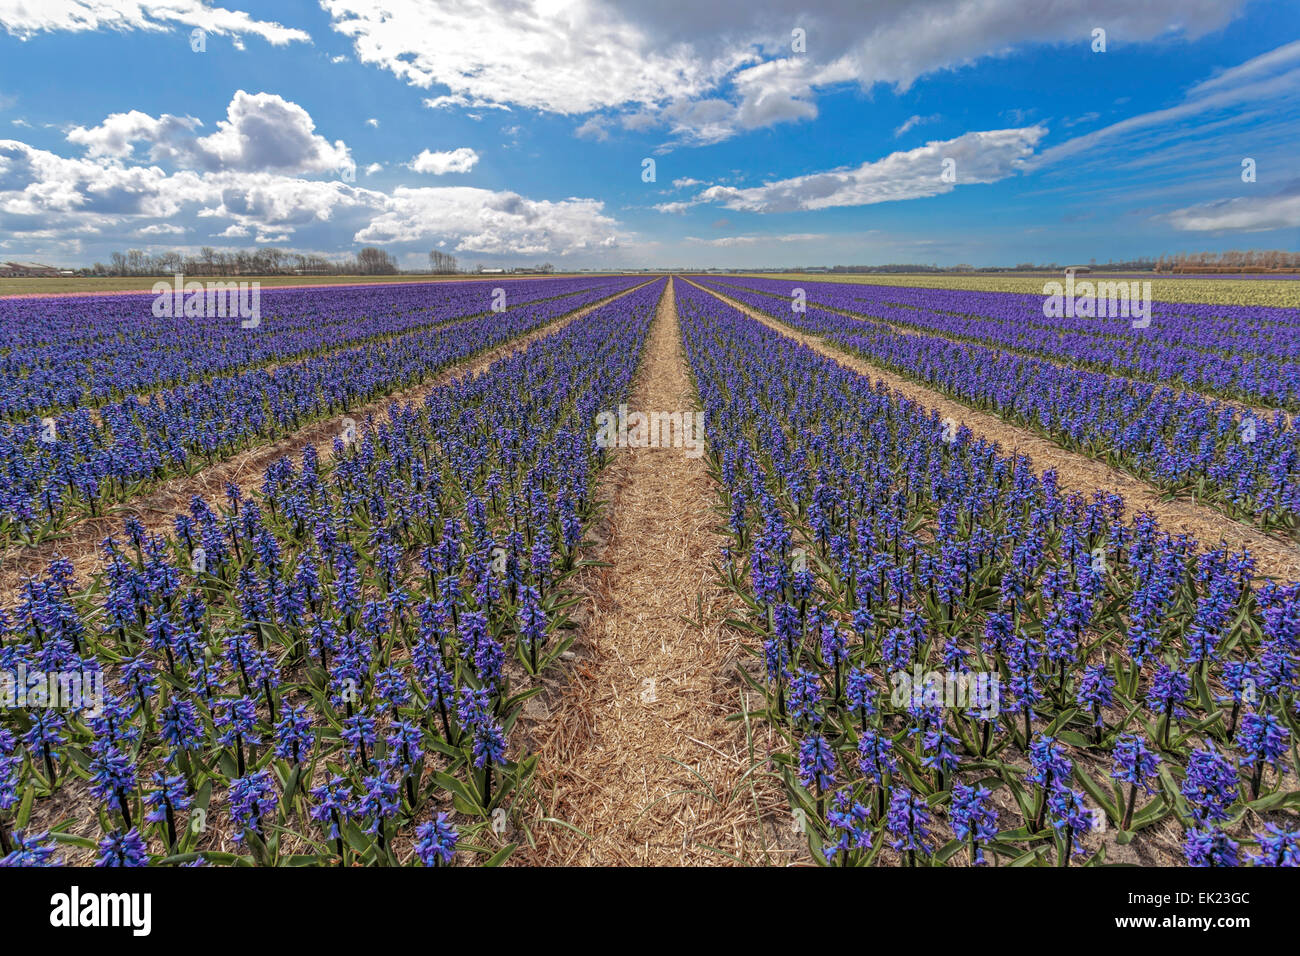 Spring time in he Netherlands: Wide angle view of flowering blue hyacinths, Voorhout, South Holland. Stock Photo